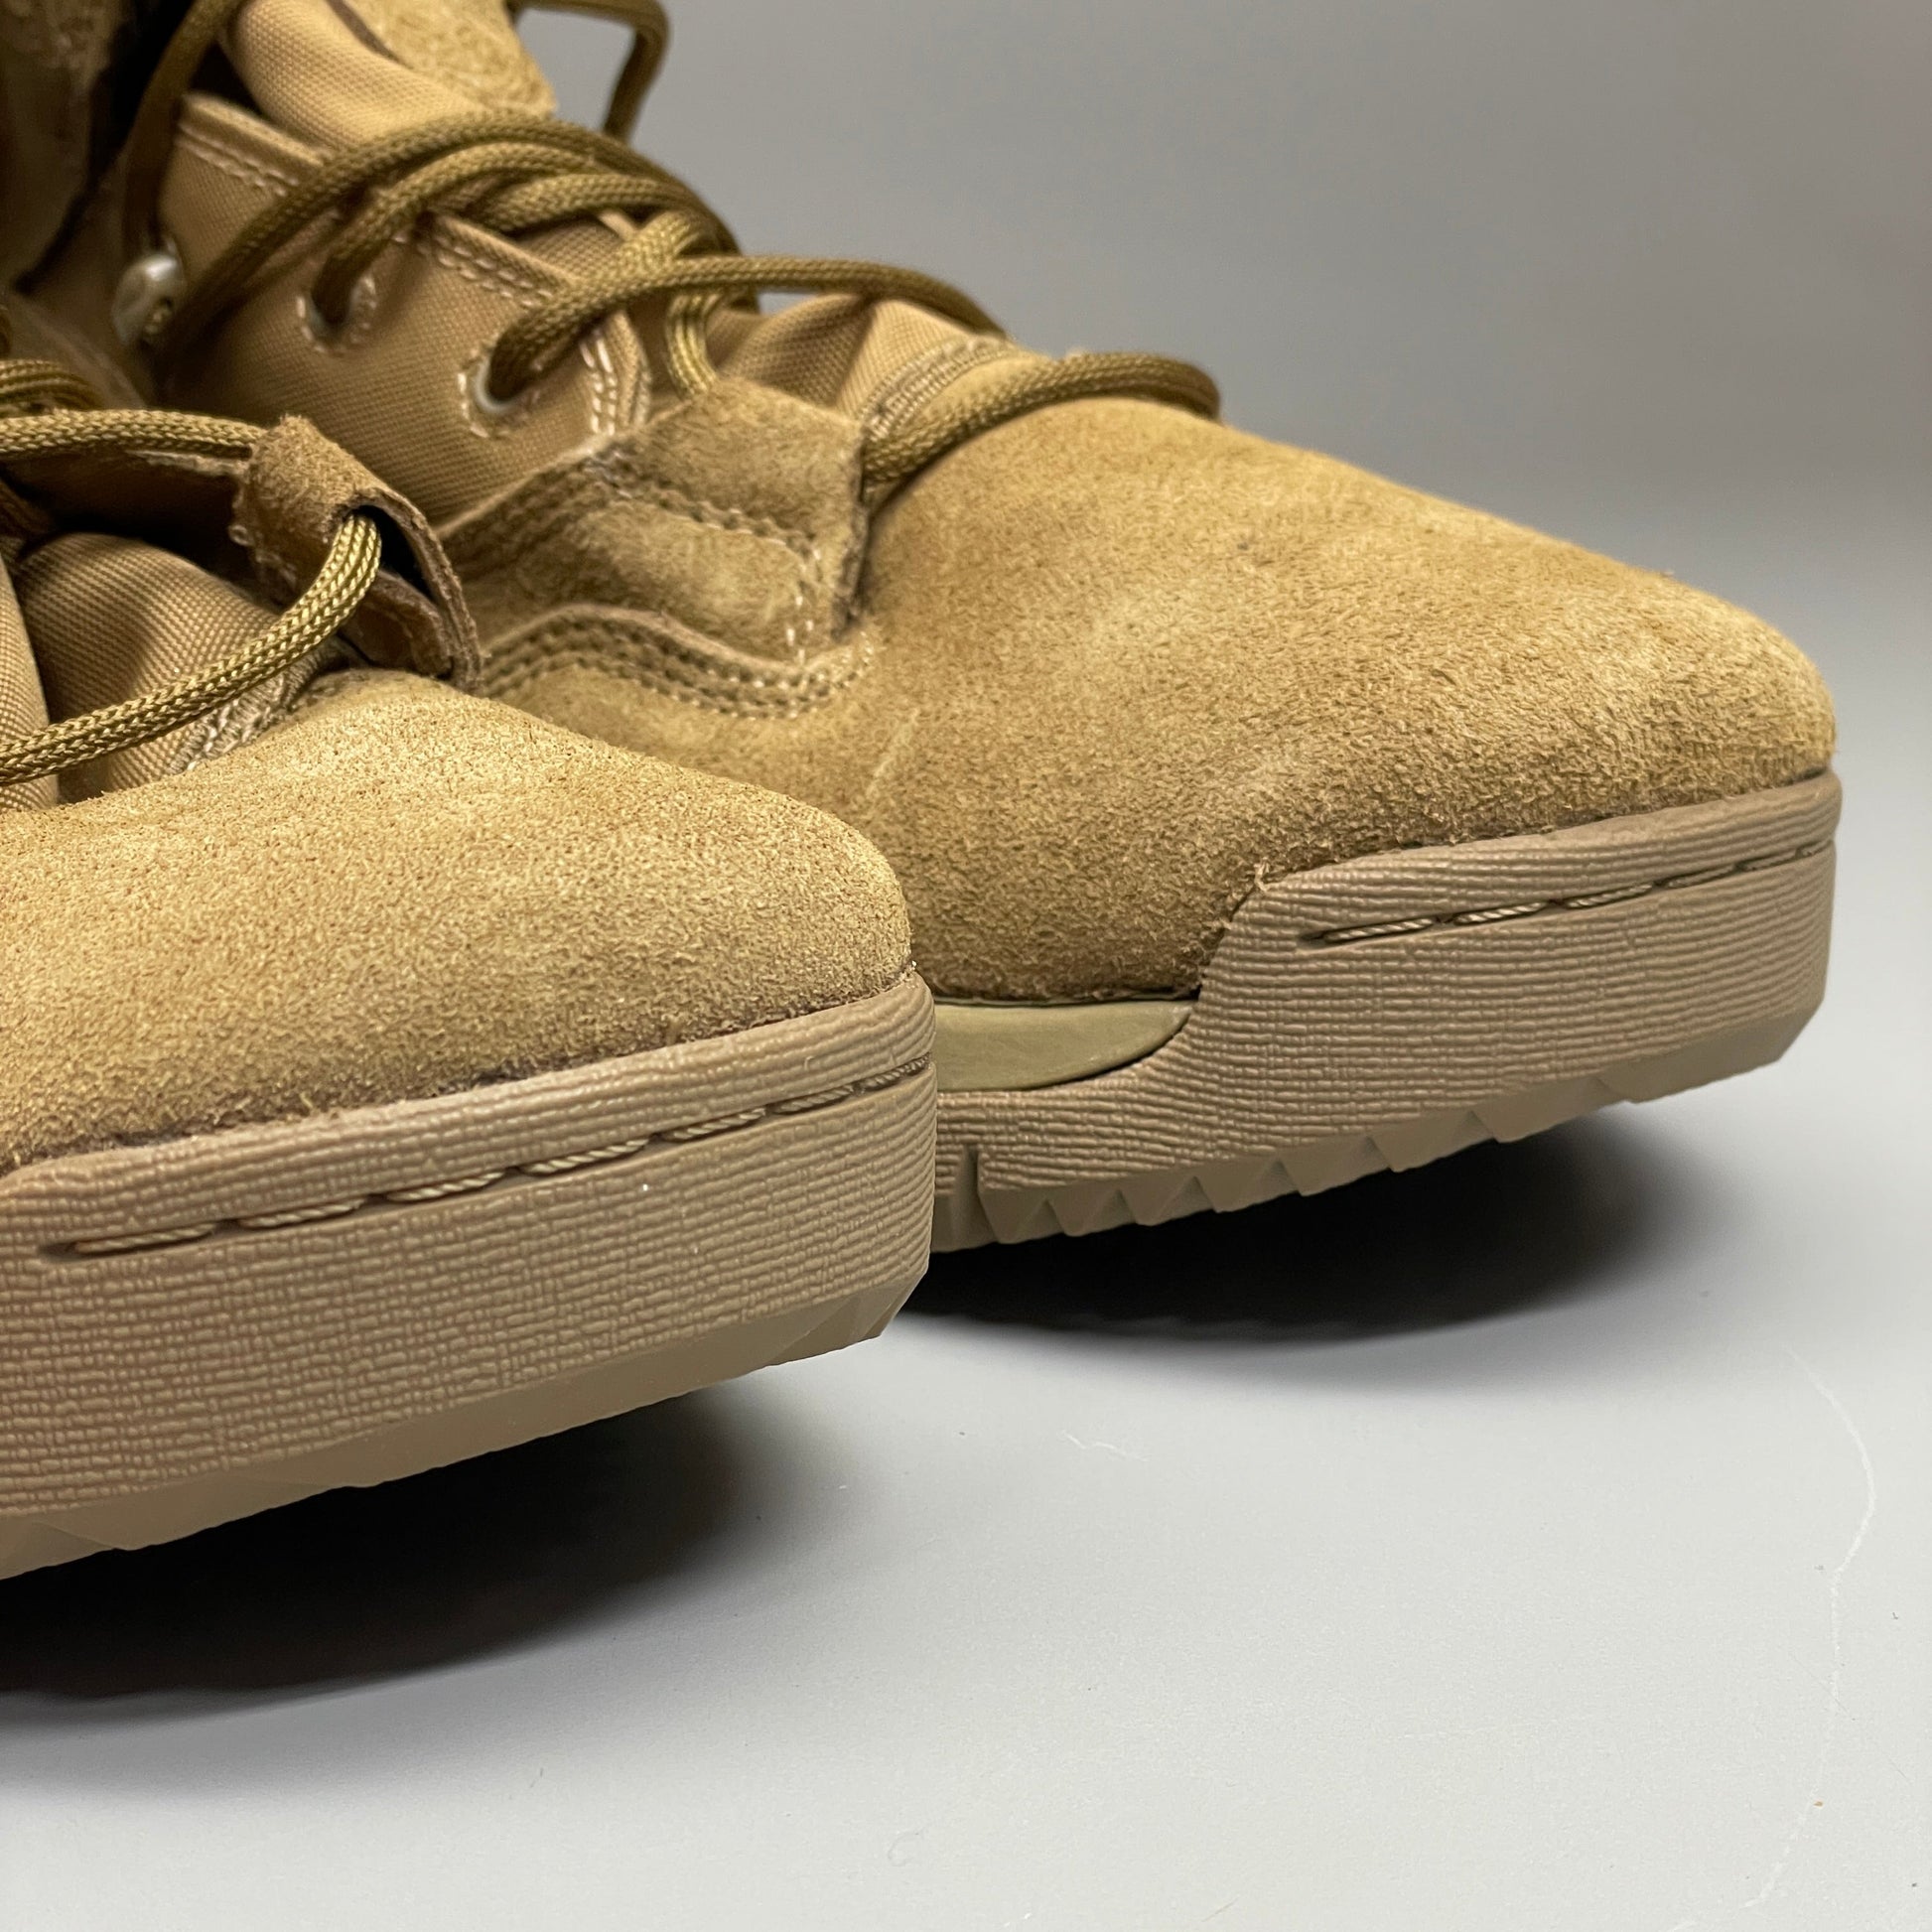 Nike SFB Field 2 8 Leather Tactical Boots.